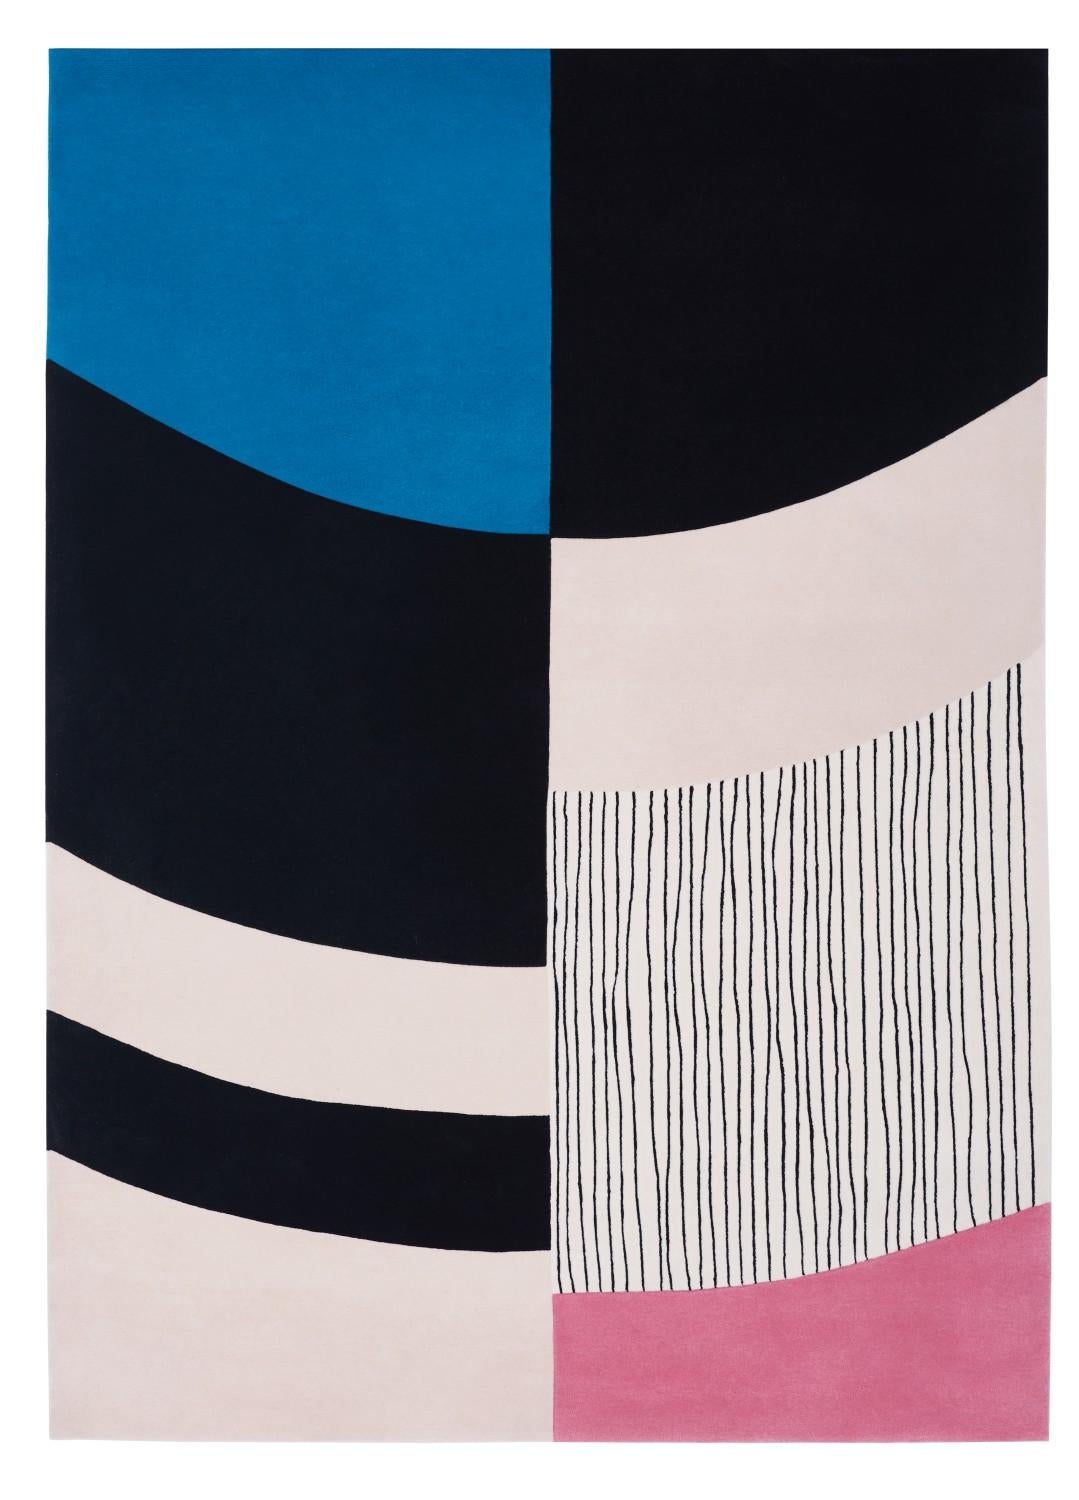 Contemporary colorful rug inspired by Seoul's Aesthetic
Dimensions: W 200 x D 240 CM
New-Zealand wool and silk

The South-Korea capital is known for its twenty-five bridges spanning the vast Hangang River. The collection was born from this idea,